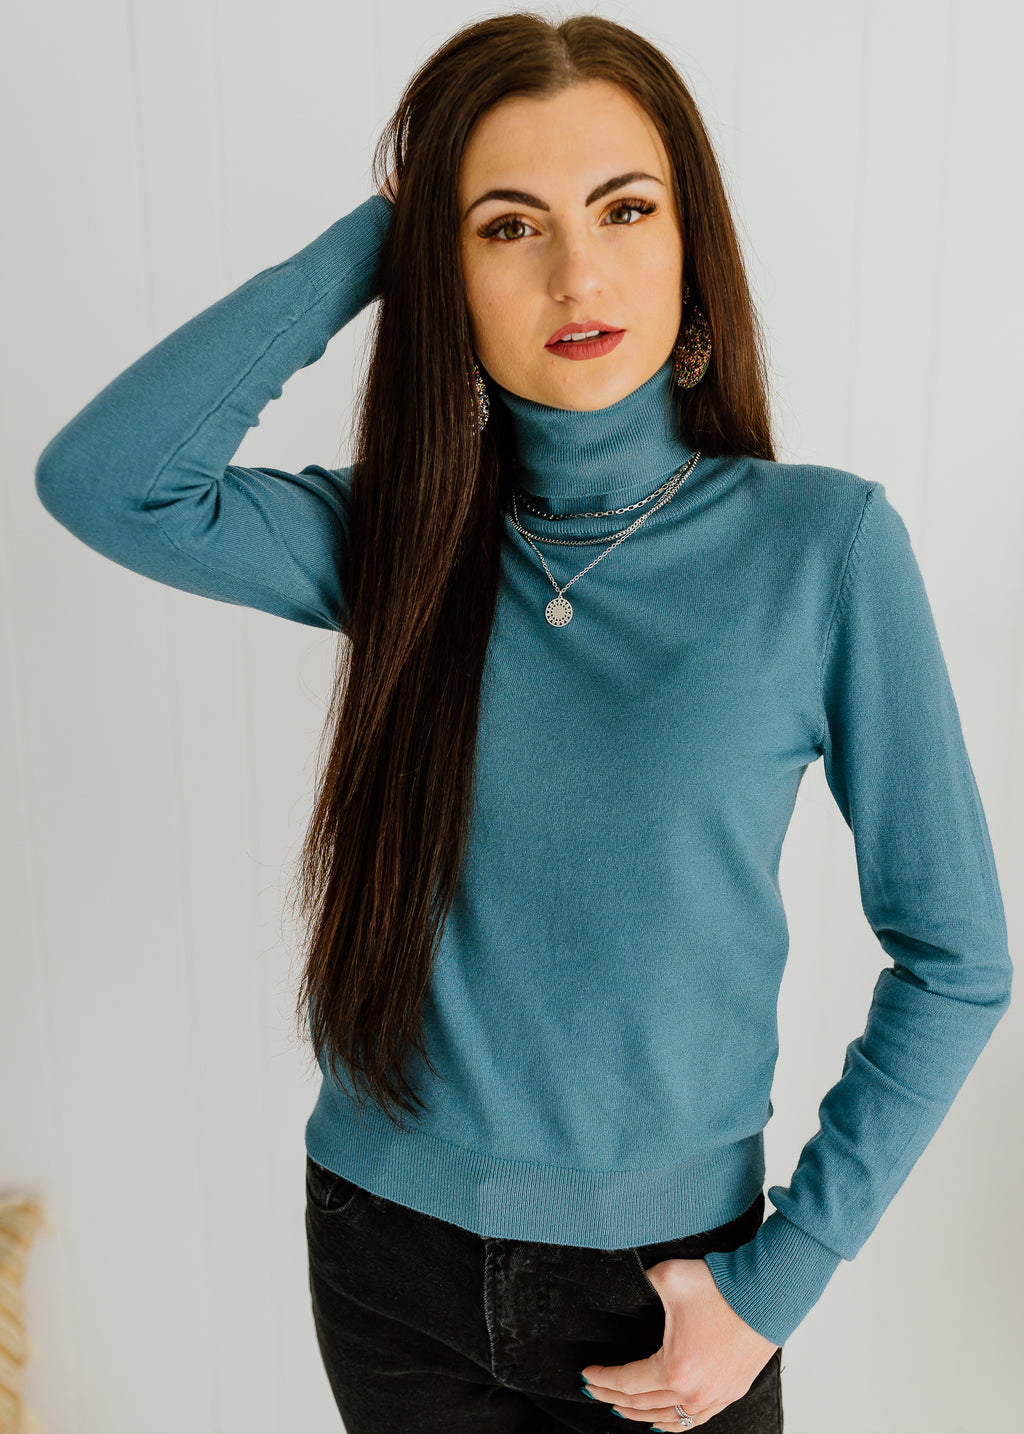 "All I Could Say" Solid Turtleneck Top - Teal